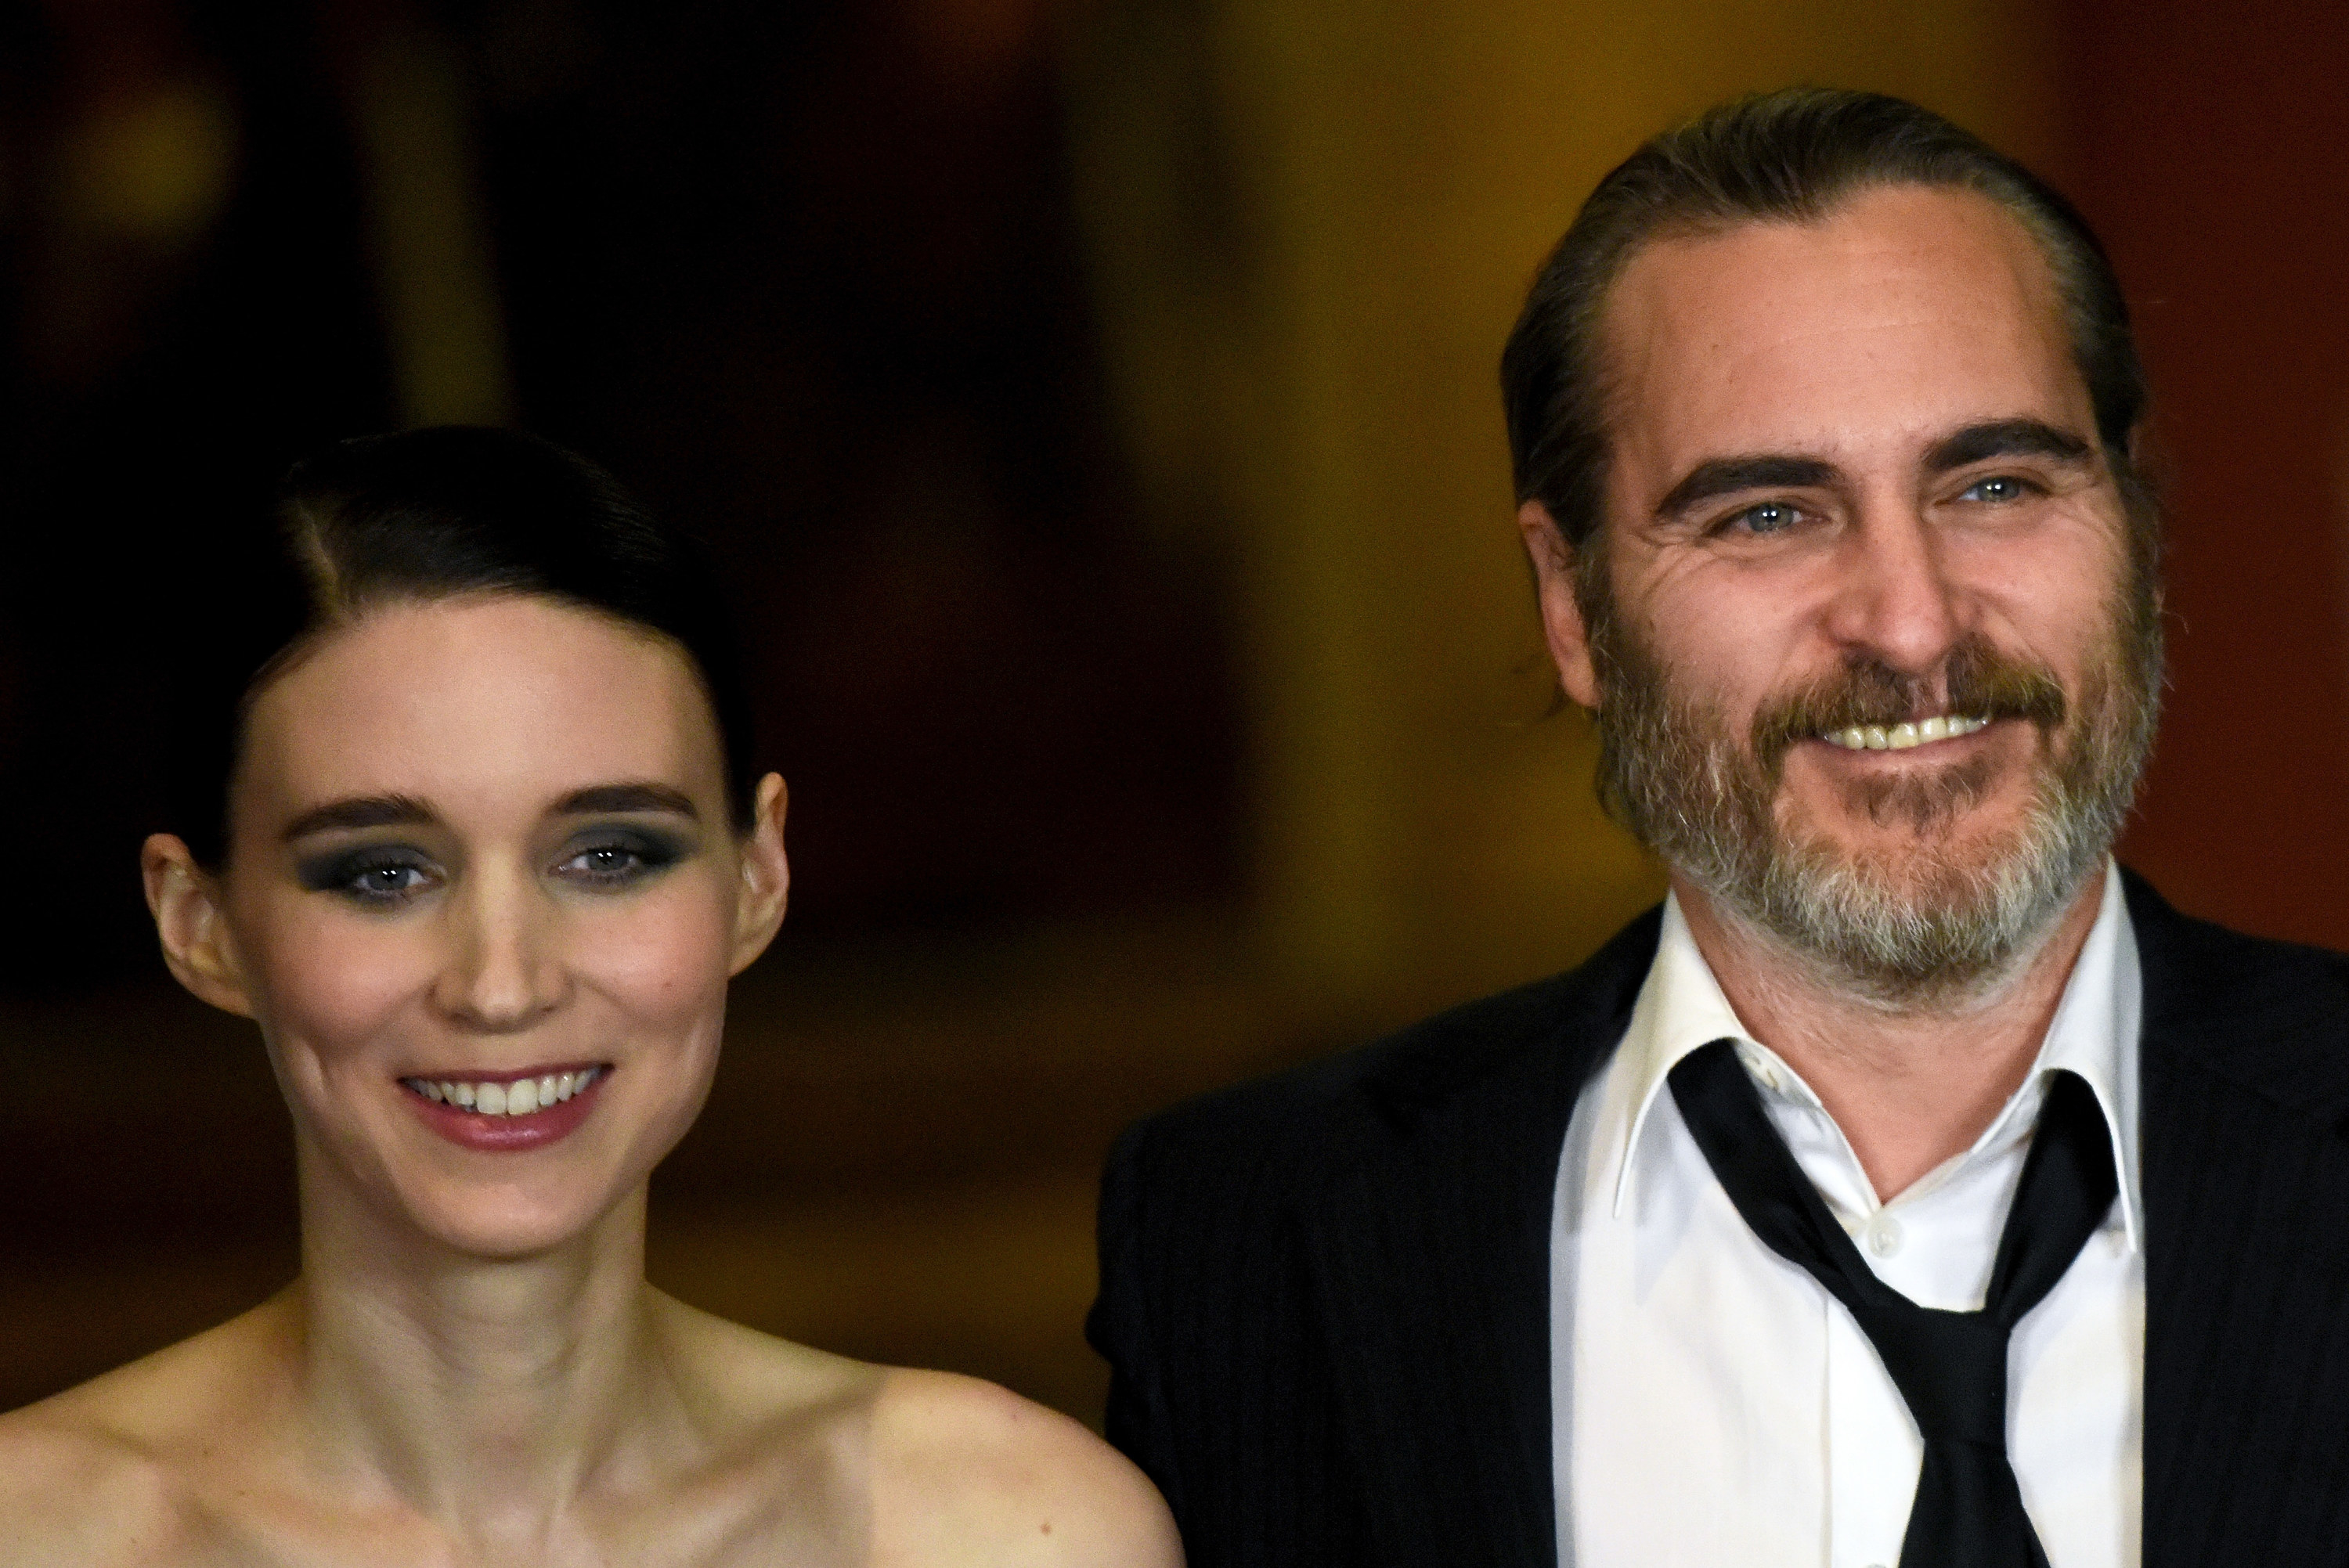 Rooney and Joaquin smiles while onstage at a movie screening